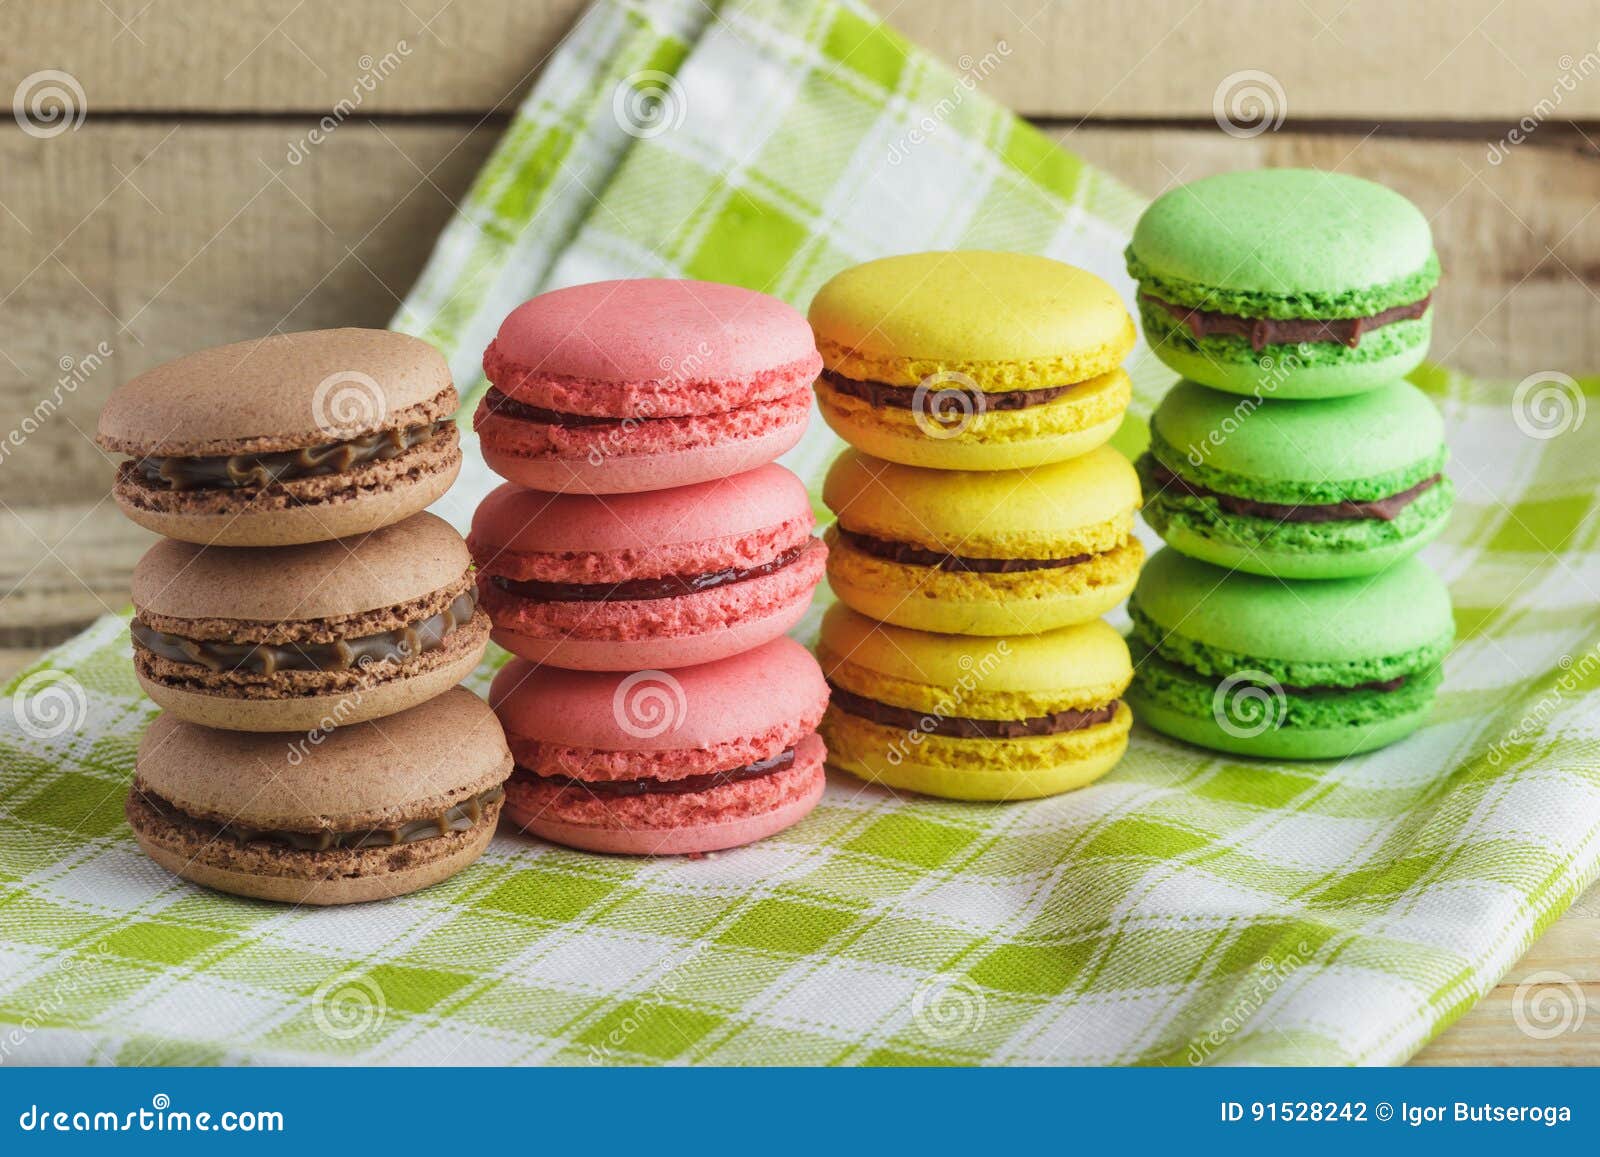 Brown, Yellow, Green and Pink Macarons on the Plaid Napkin Stock Photo ...